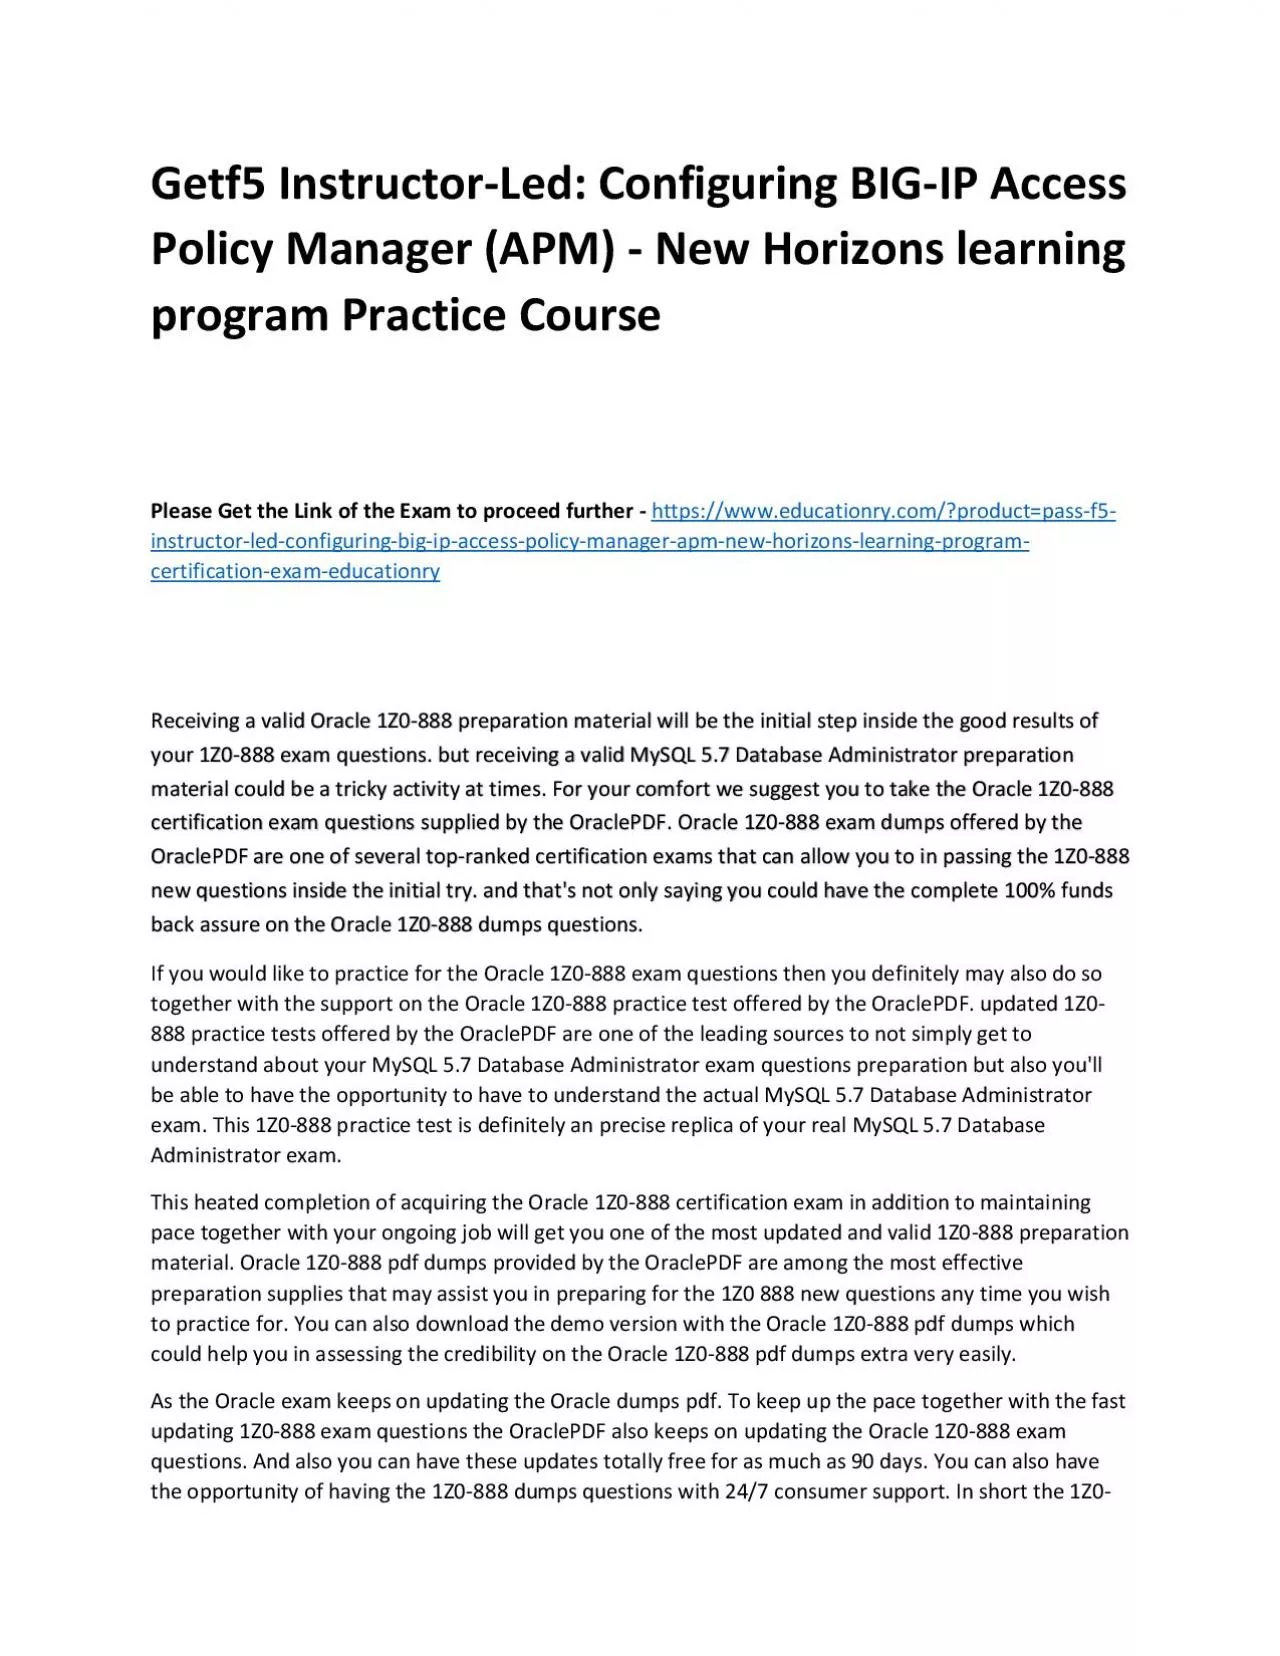 f5 Instructor-Led: Configuring BIG-IP Access Policy Manager (APM) - New Horizons learning